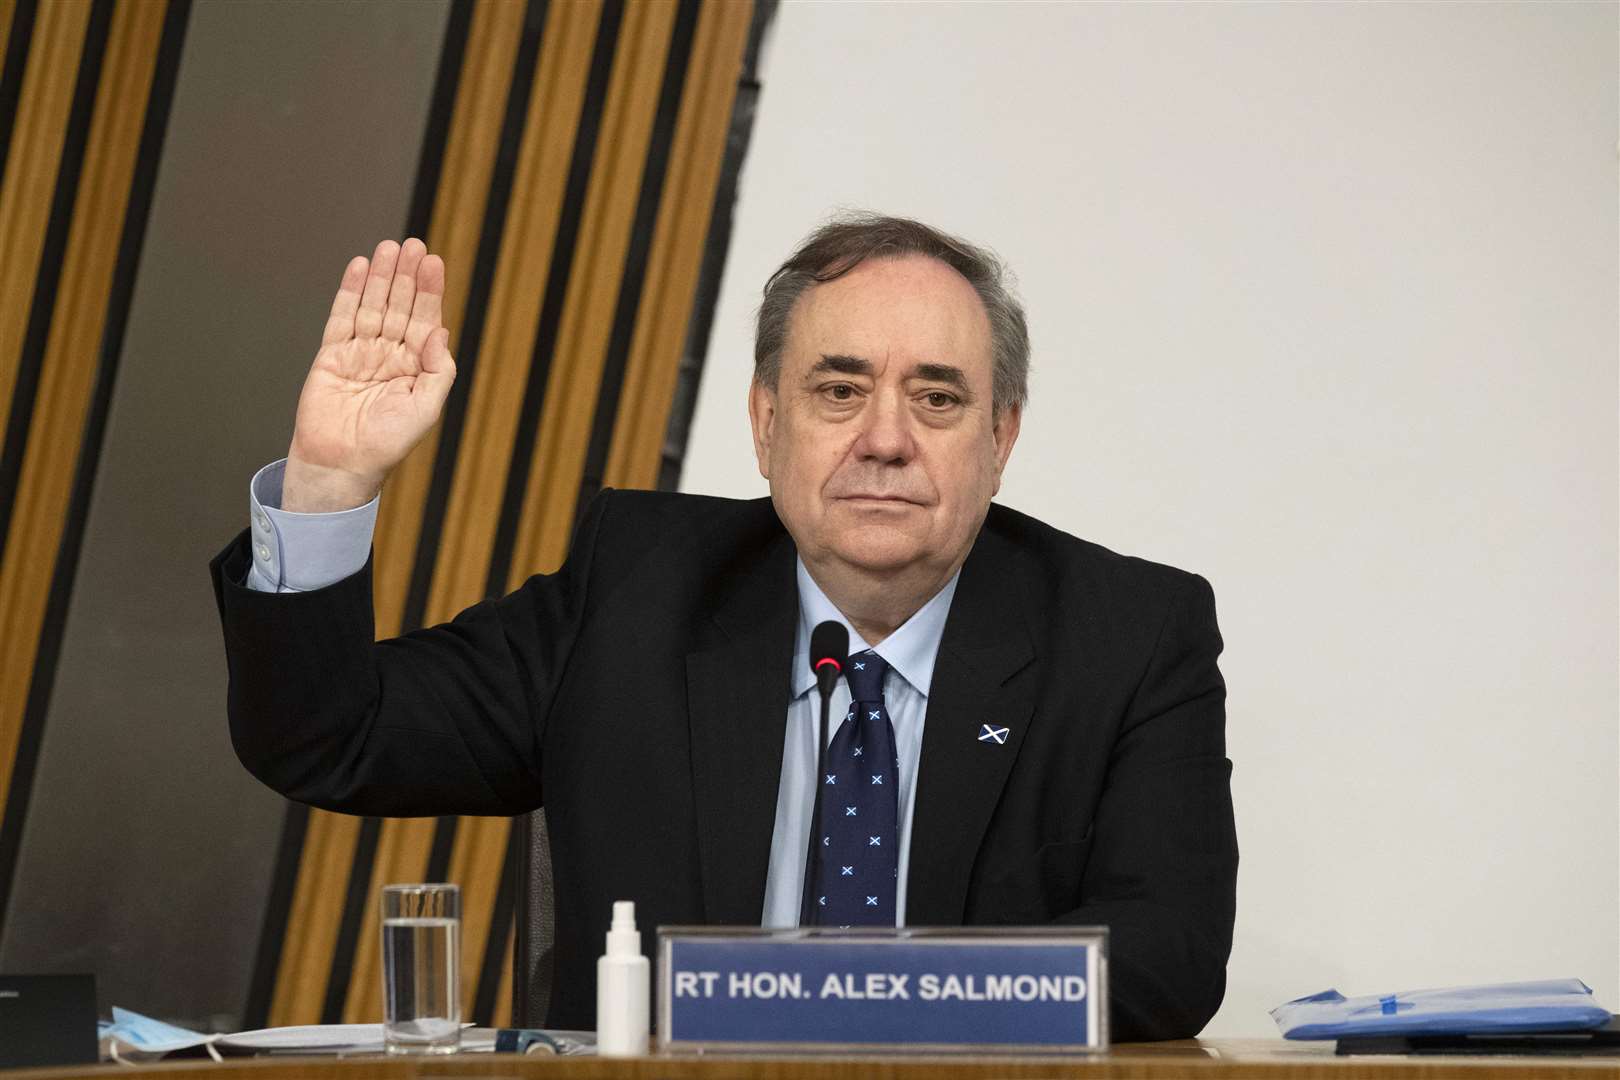 Former first minister Alex Salmond is sworn in before giving evidence to the committee (Andy Buchanan/PA)